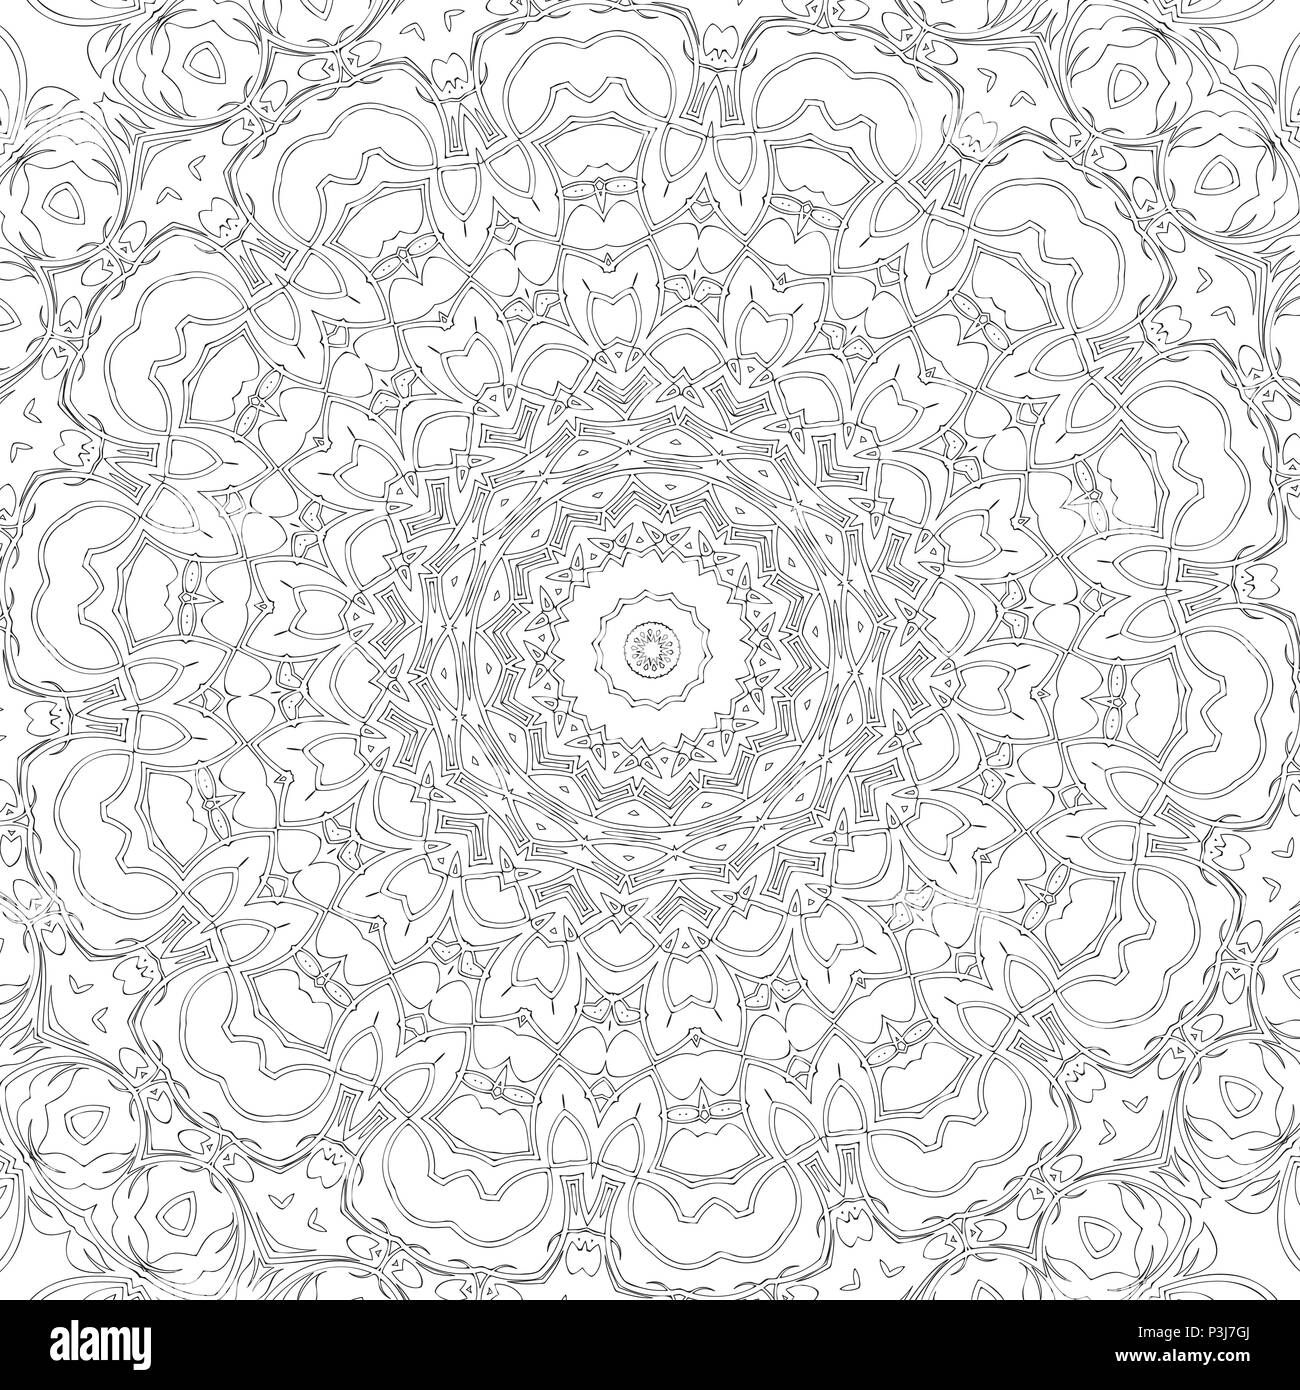 Decorative design for adult coloring page Stock Photo